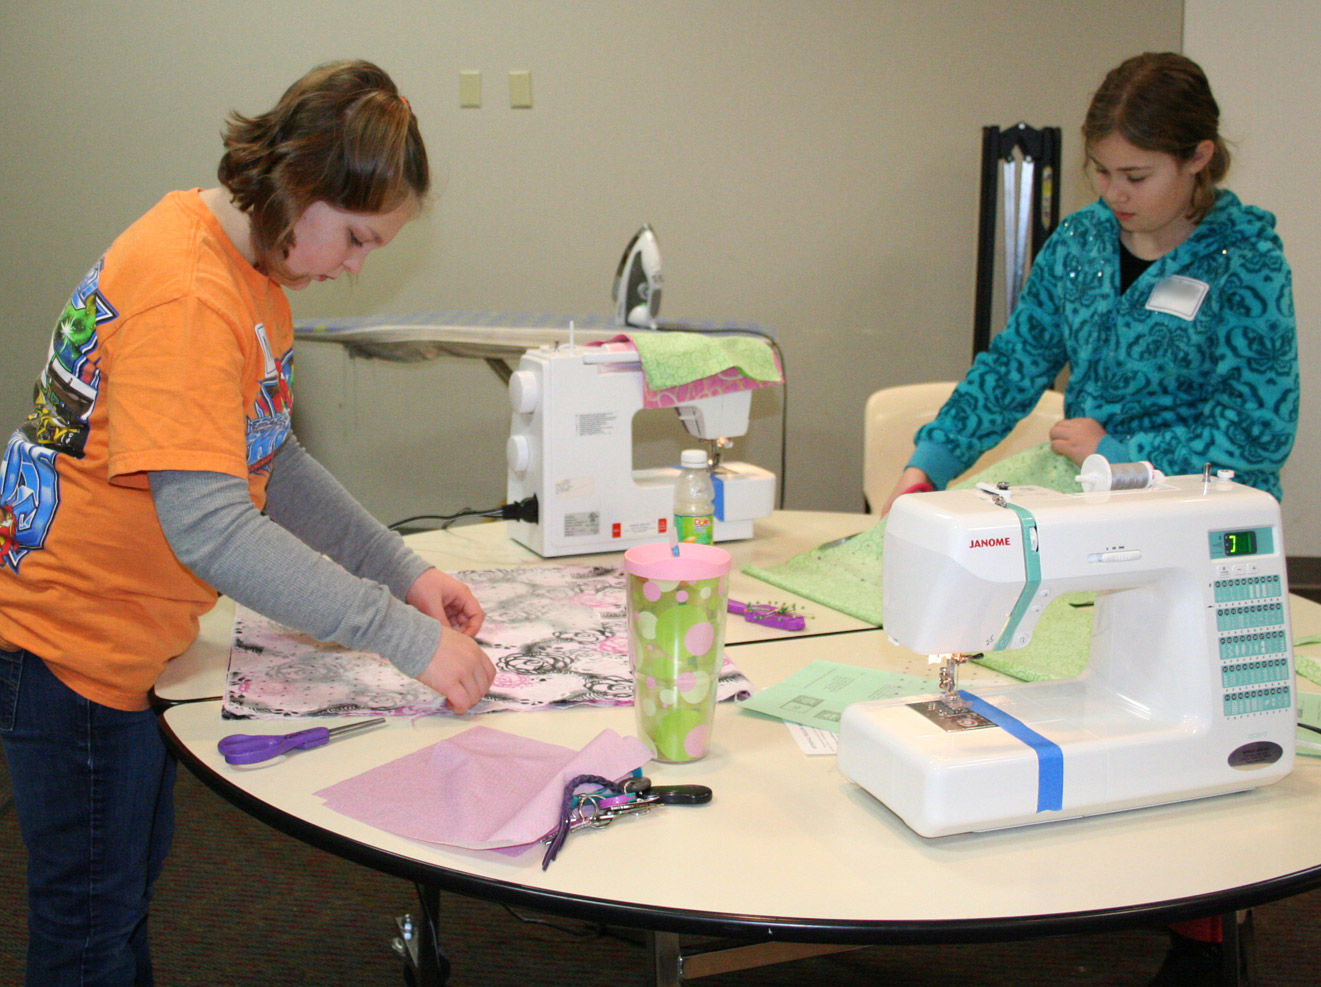 Learn beginning sewing skills and make a pillow at a "Pillow Party" workshop Feb. 23